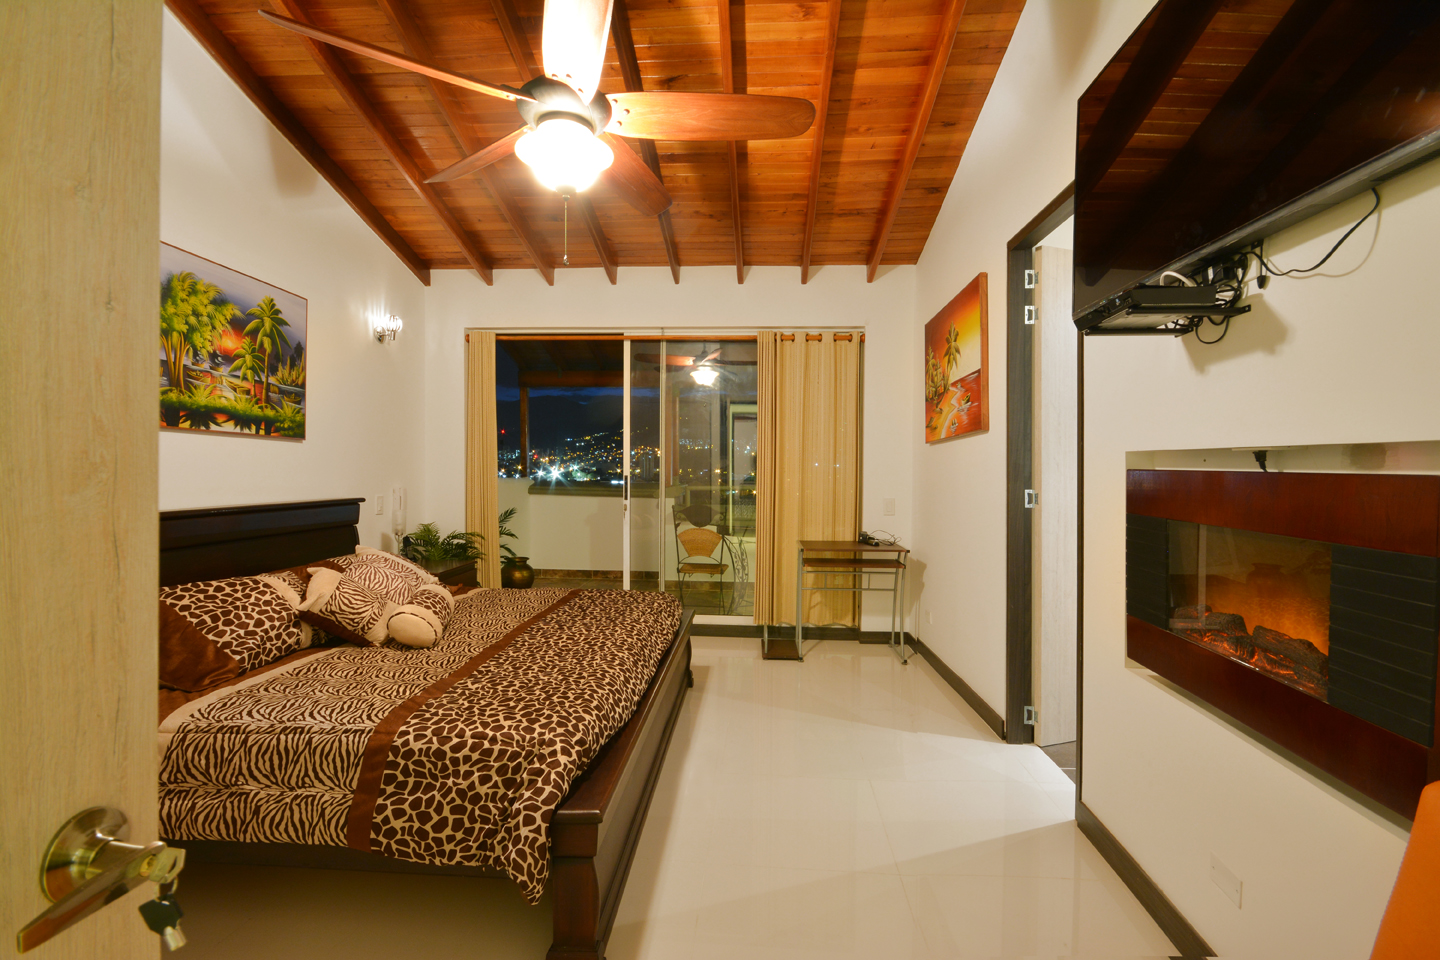 Bedroom 1 with fireplace, outdoor deck, flat screen TV, high ceilings and ceiling fan in Astorga duplex